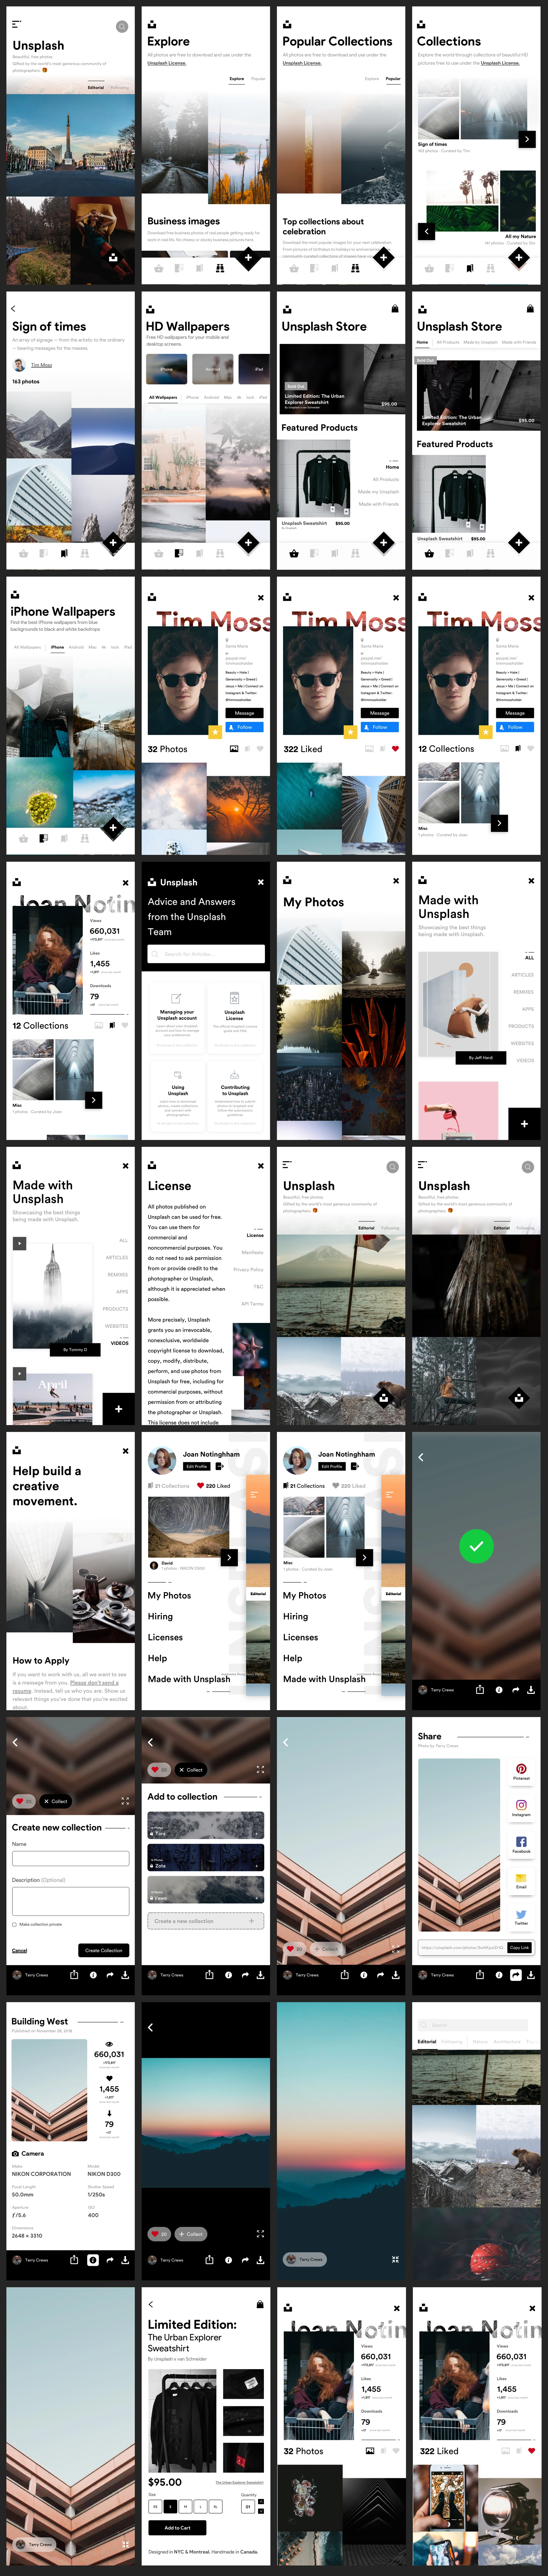 Unsplash UI Kit - Elegant and clean UI Kit for any kind of app. 35+ screens for you to get started.